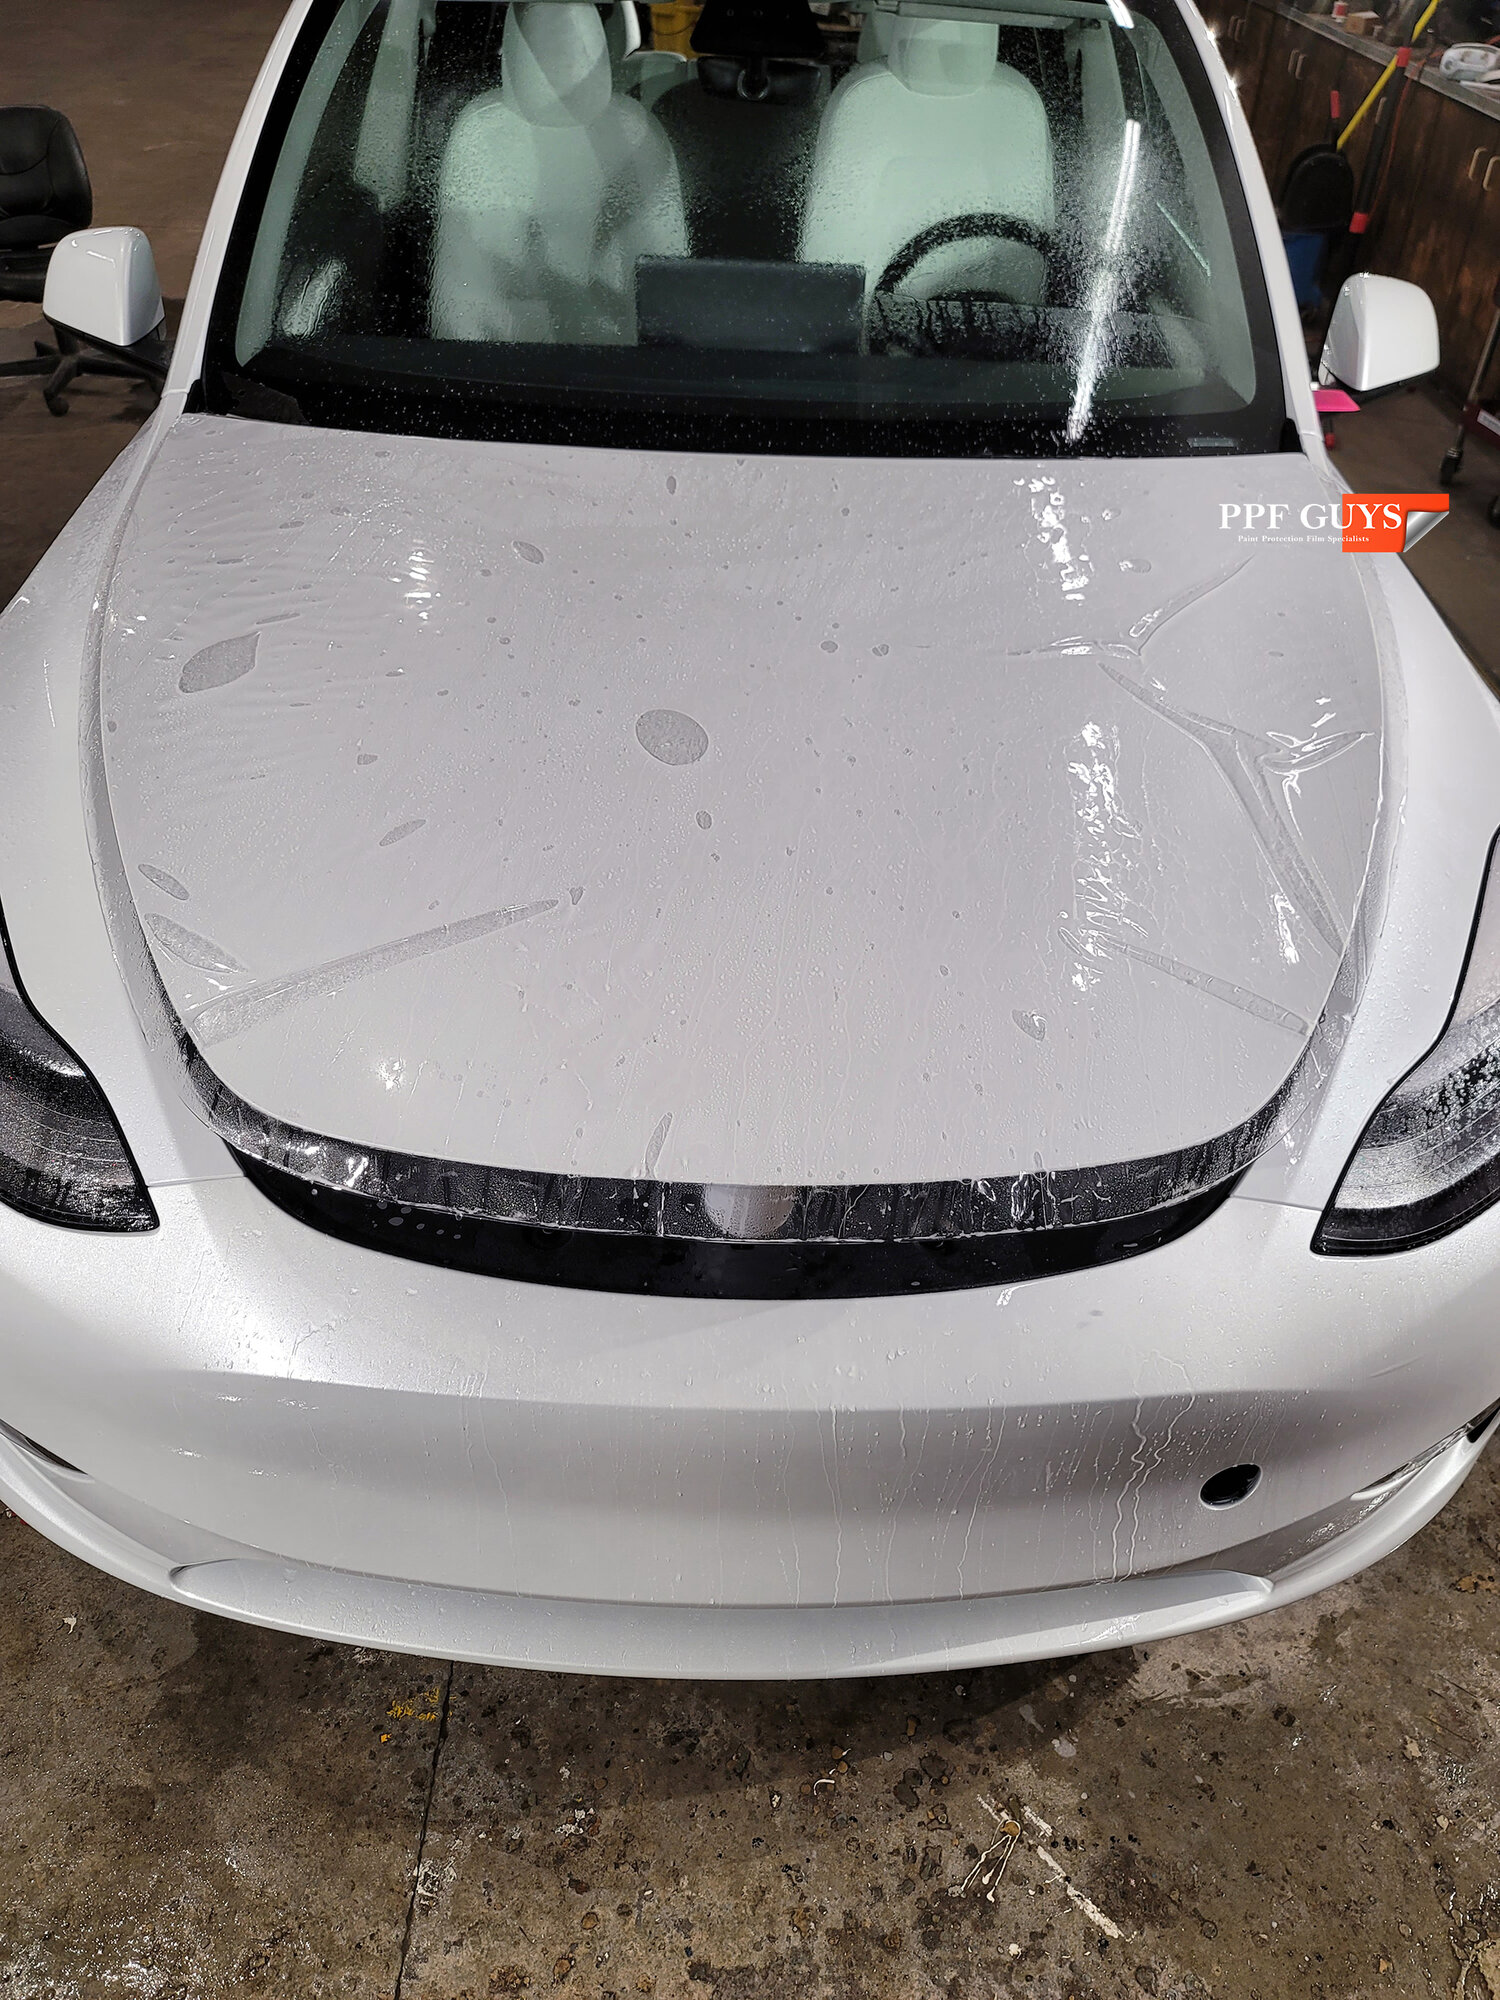 ppf guys white model y front end (2).jpg